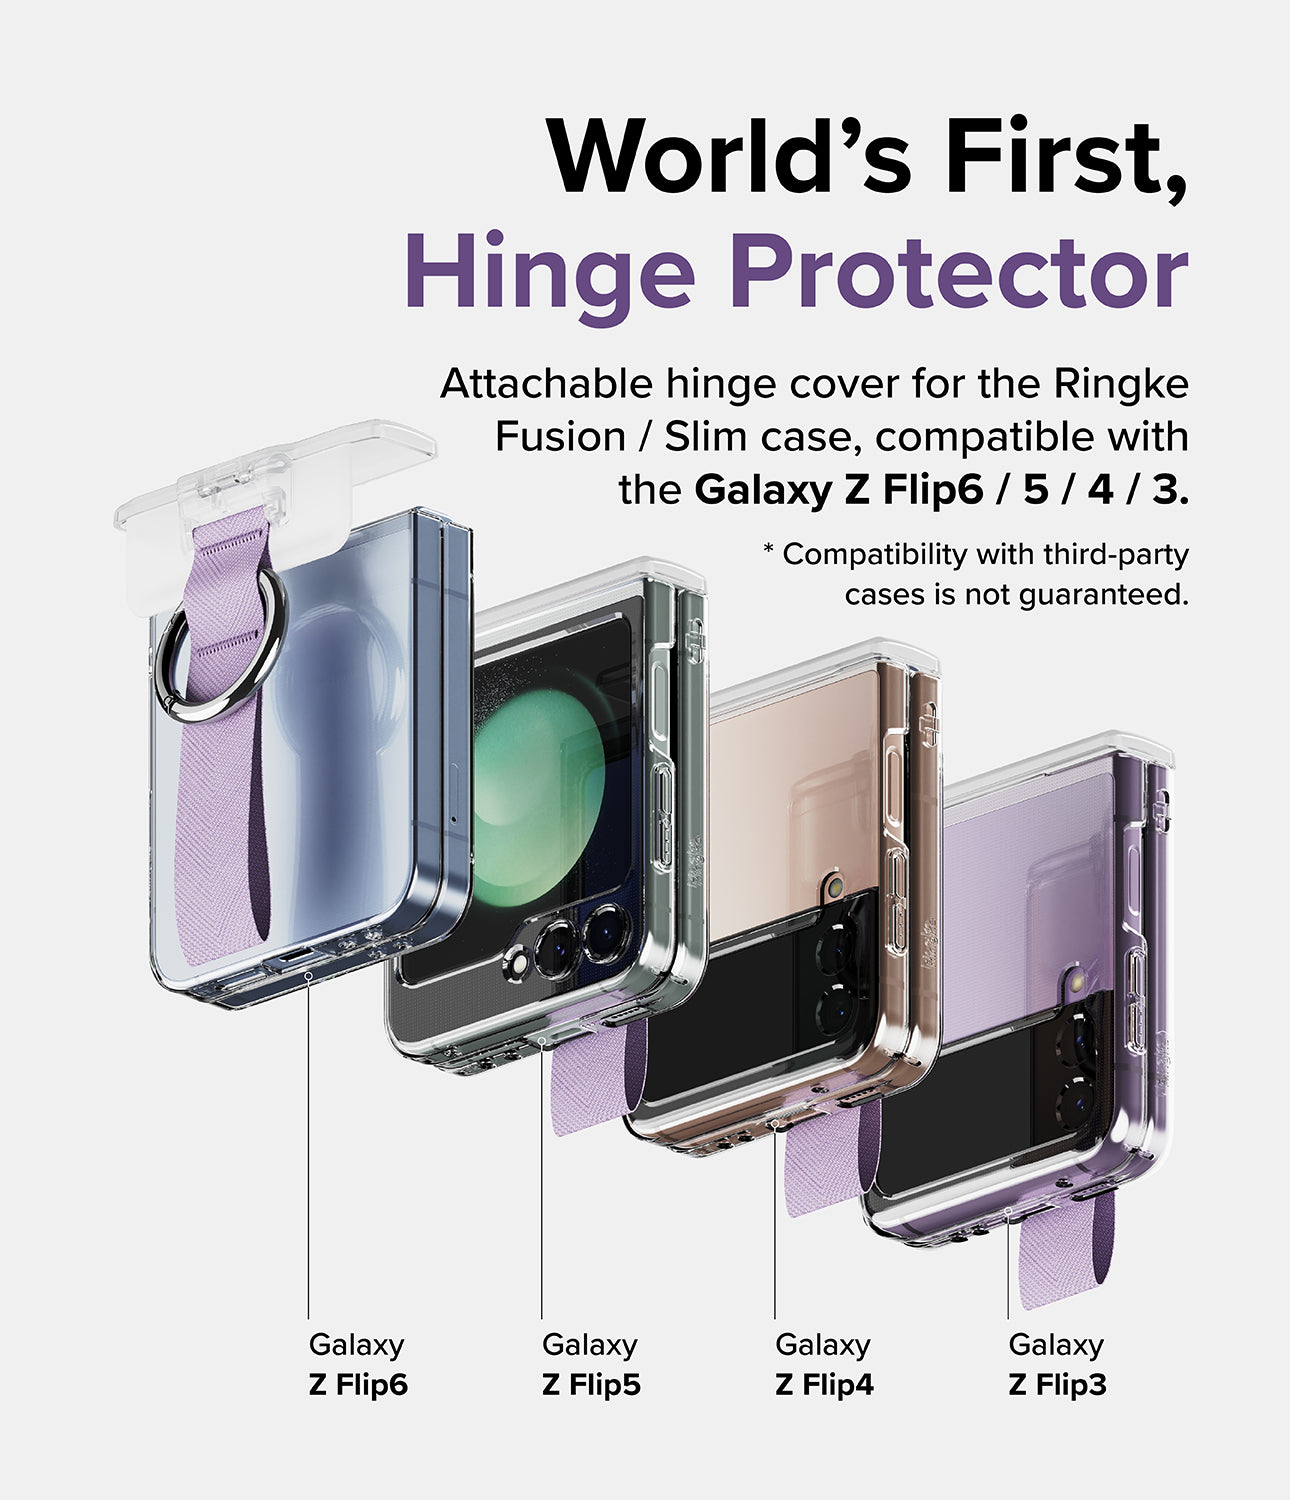 World's First, Hinge Protector